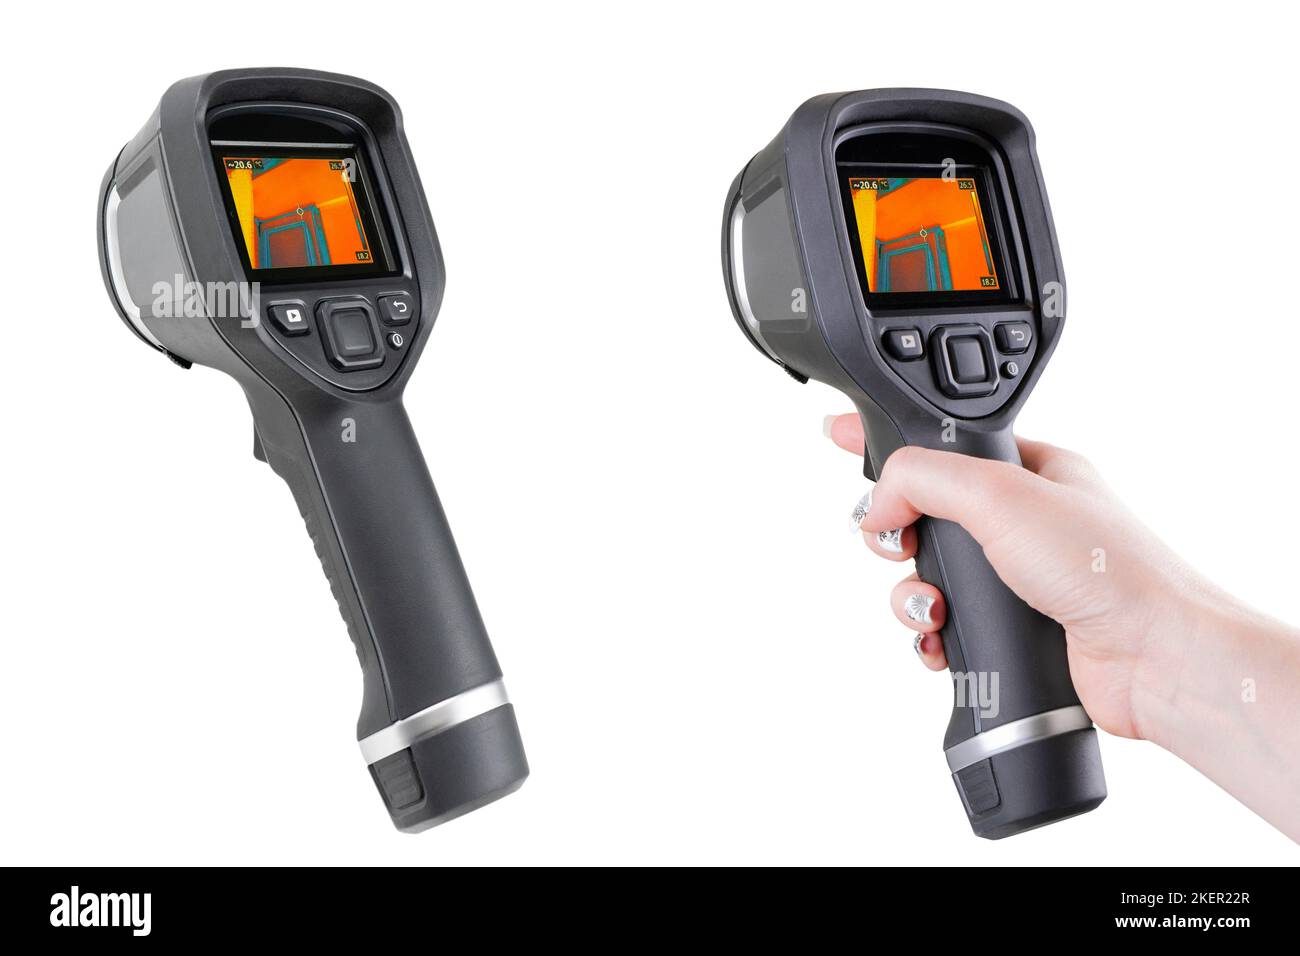 Thermal imager isolated on a white background. Monitoring the temperature distribution of the investigated surface. Thermal imaging camera inspection Stock Photo